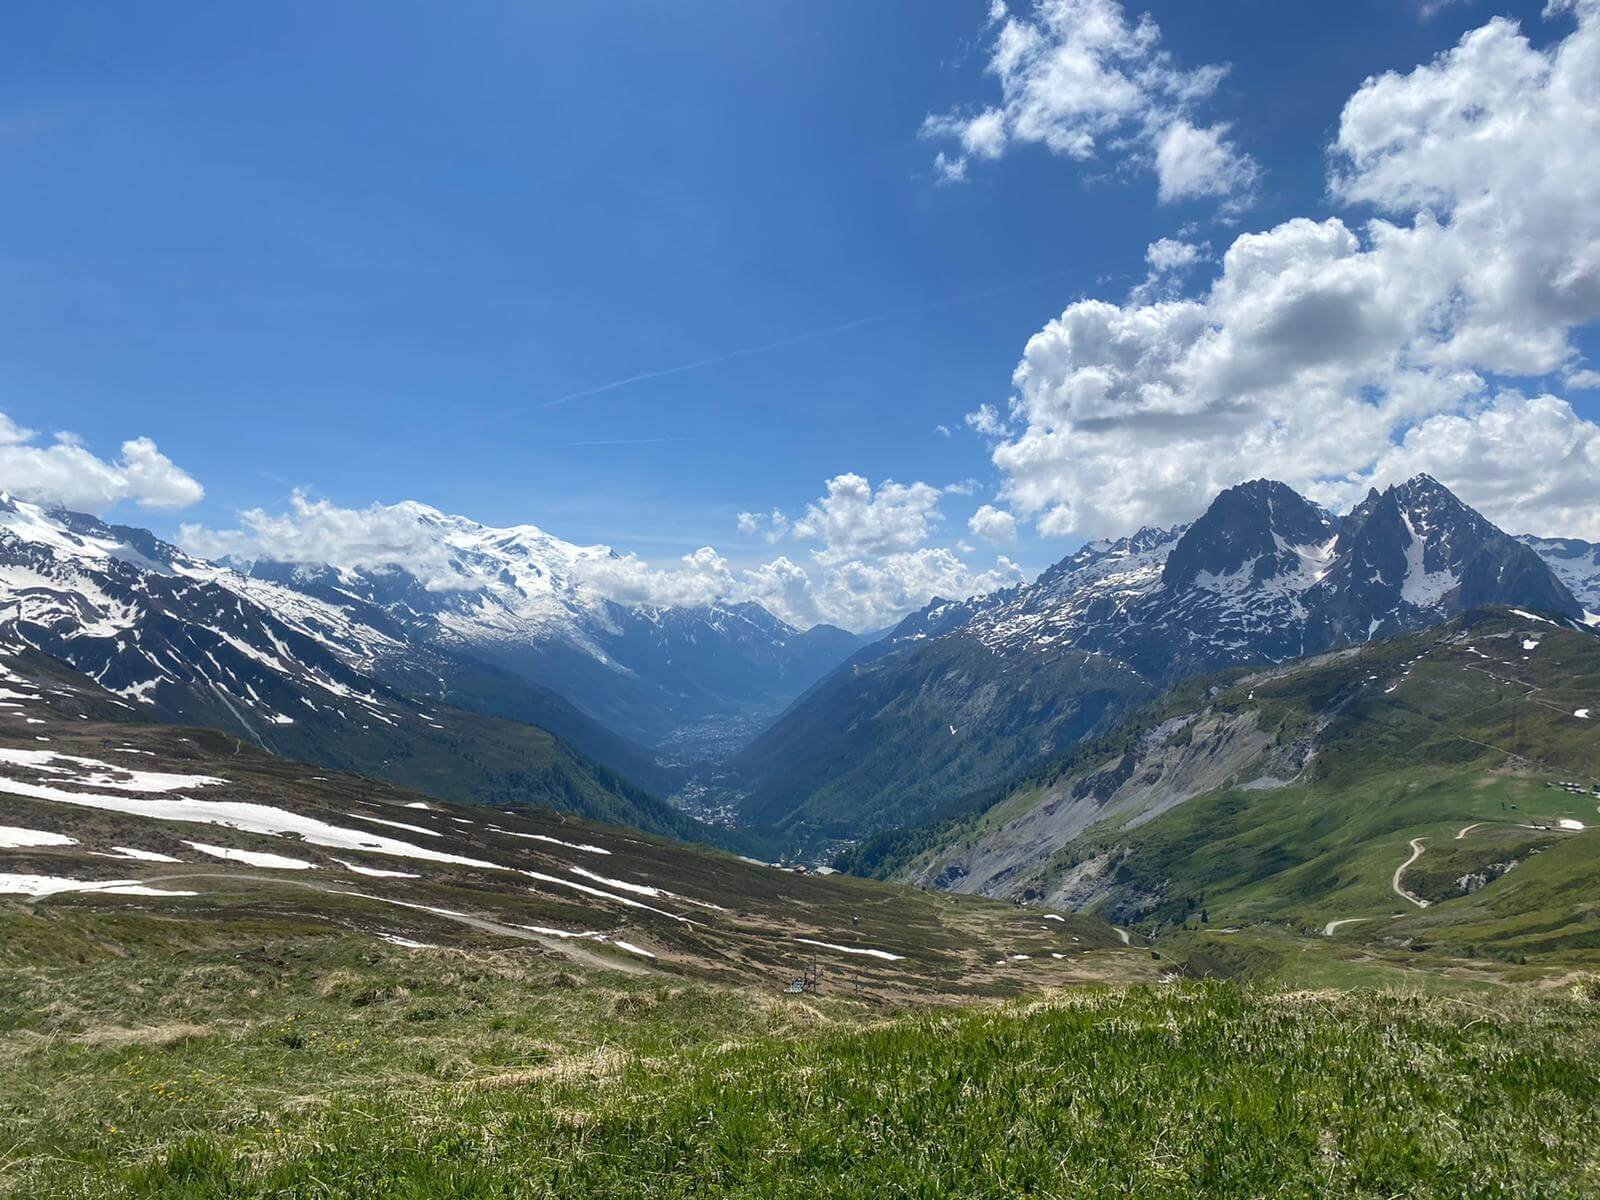 Only a few snow patches on the Swiss side of Col de Balme_27 May 2022_resized.jpg